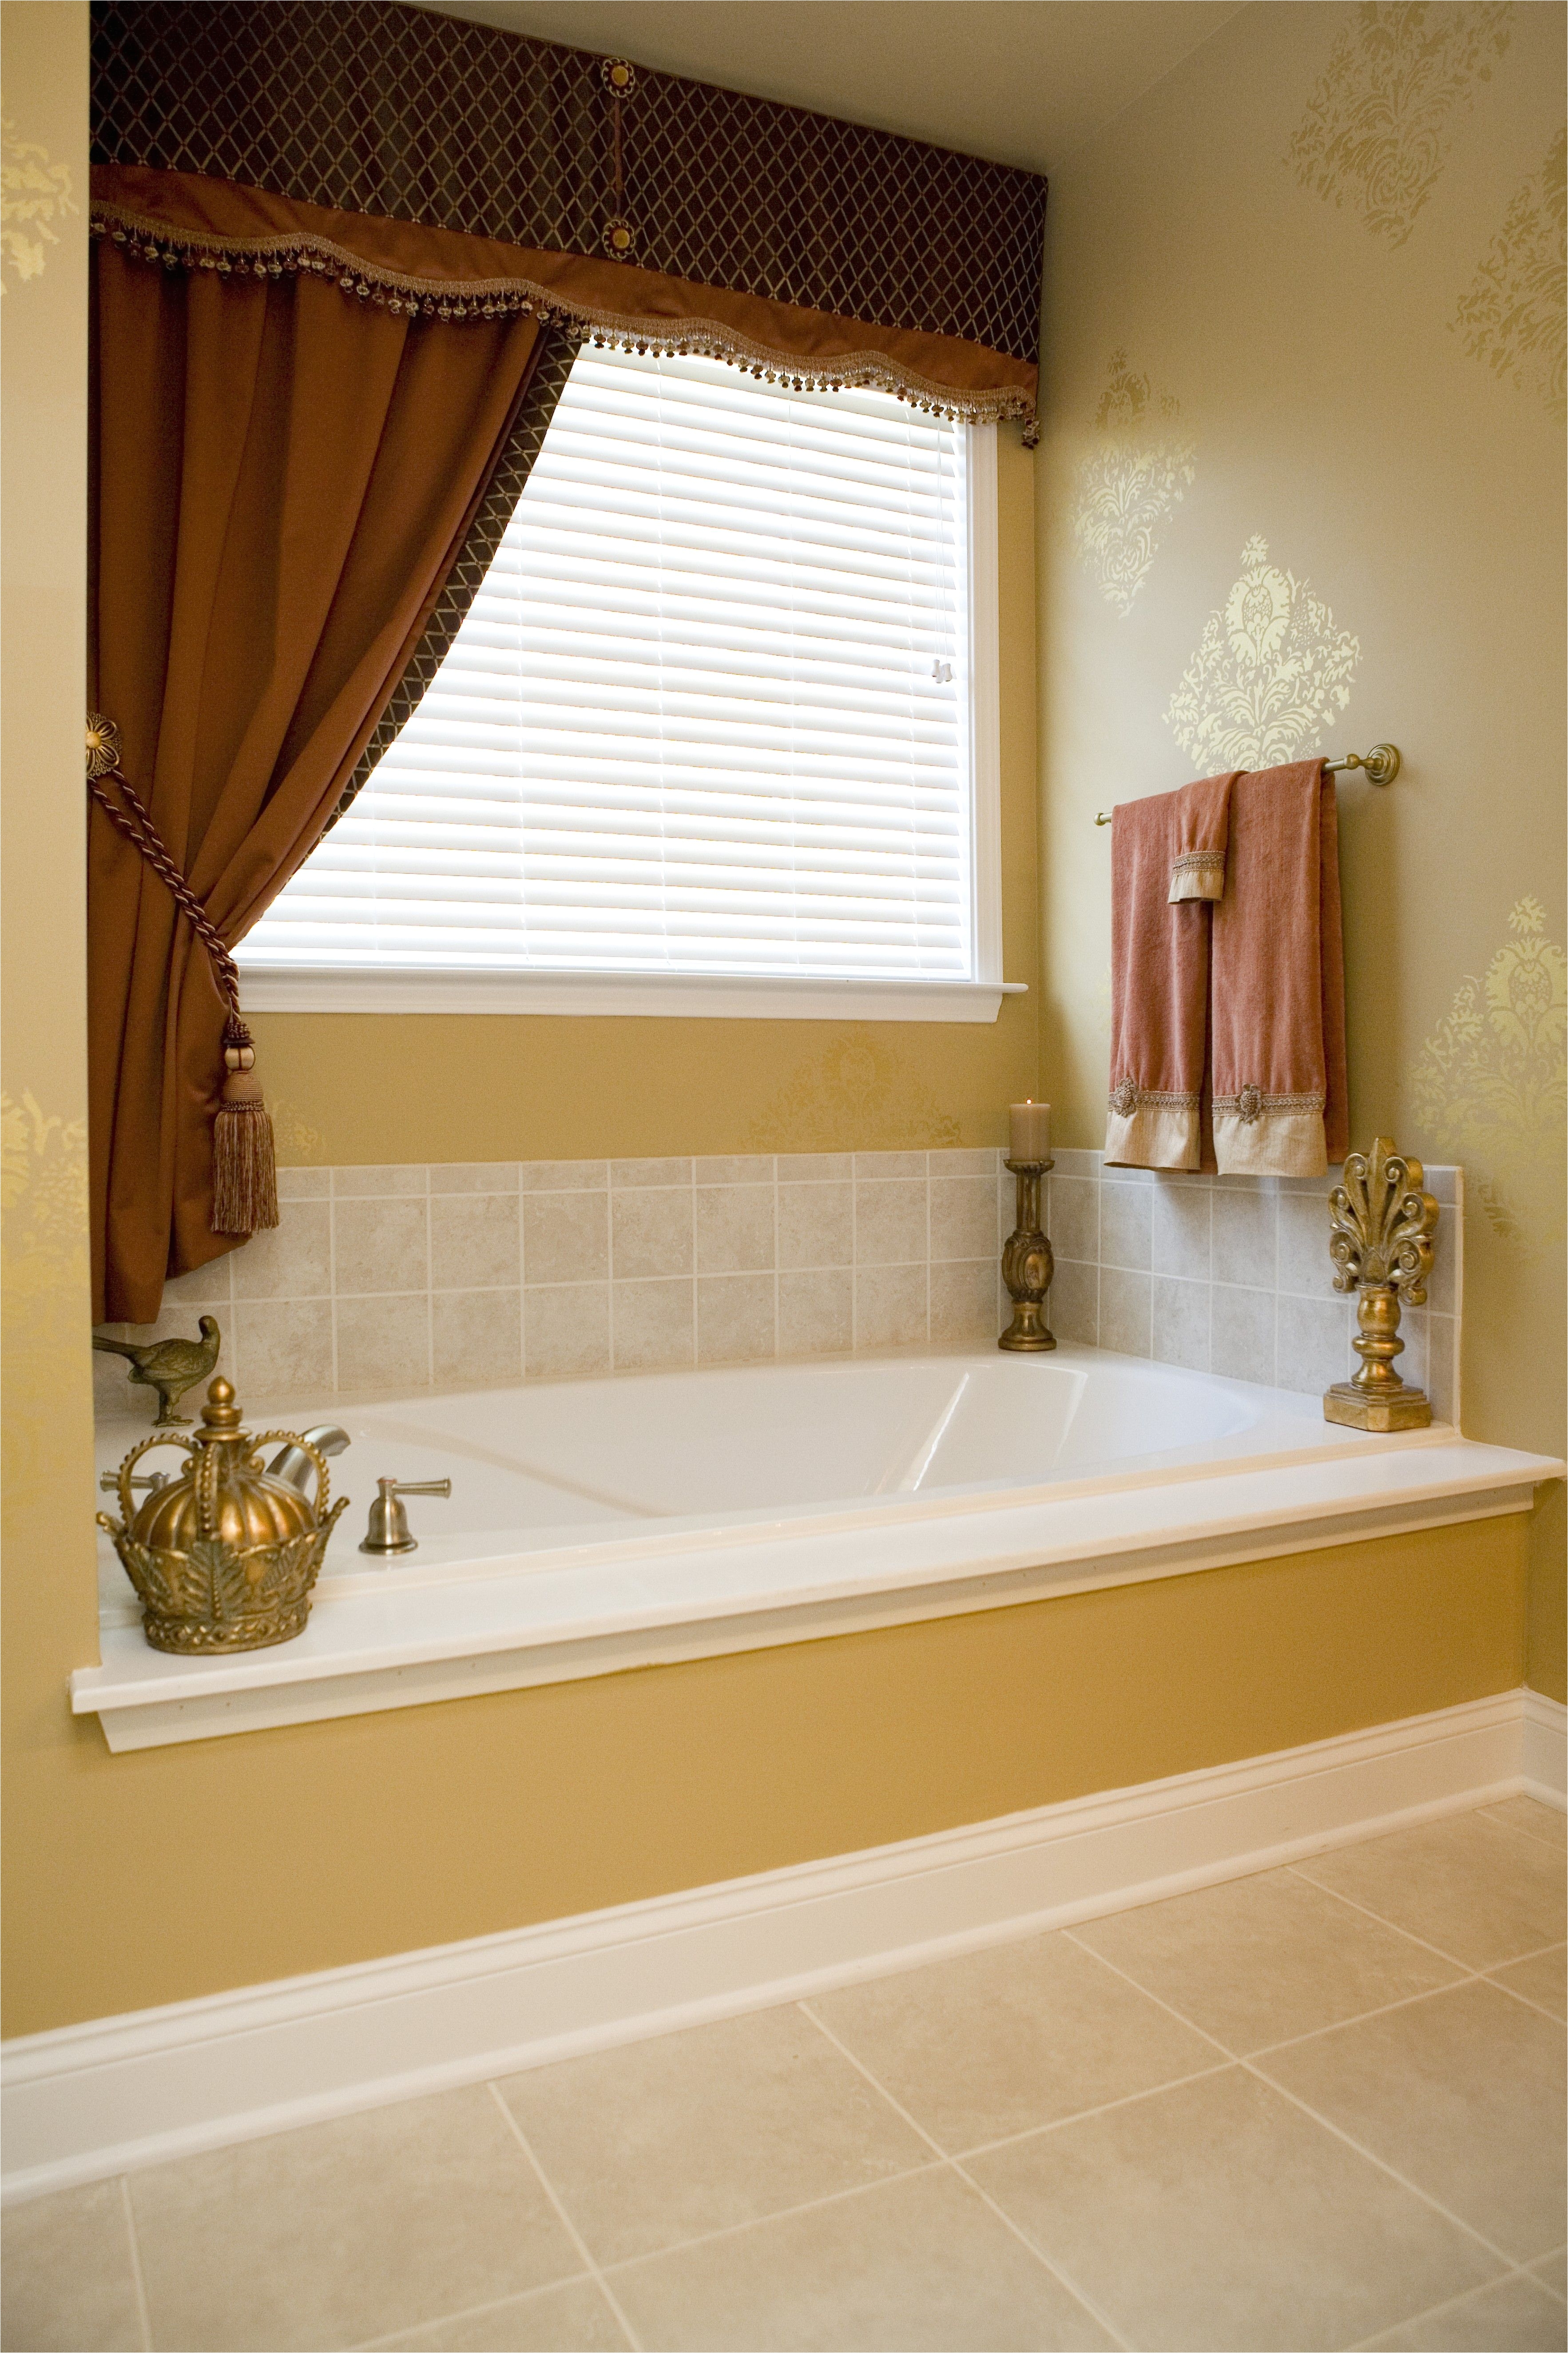 Custom made window treatments with beaded trim and rosettes interior design